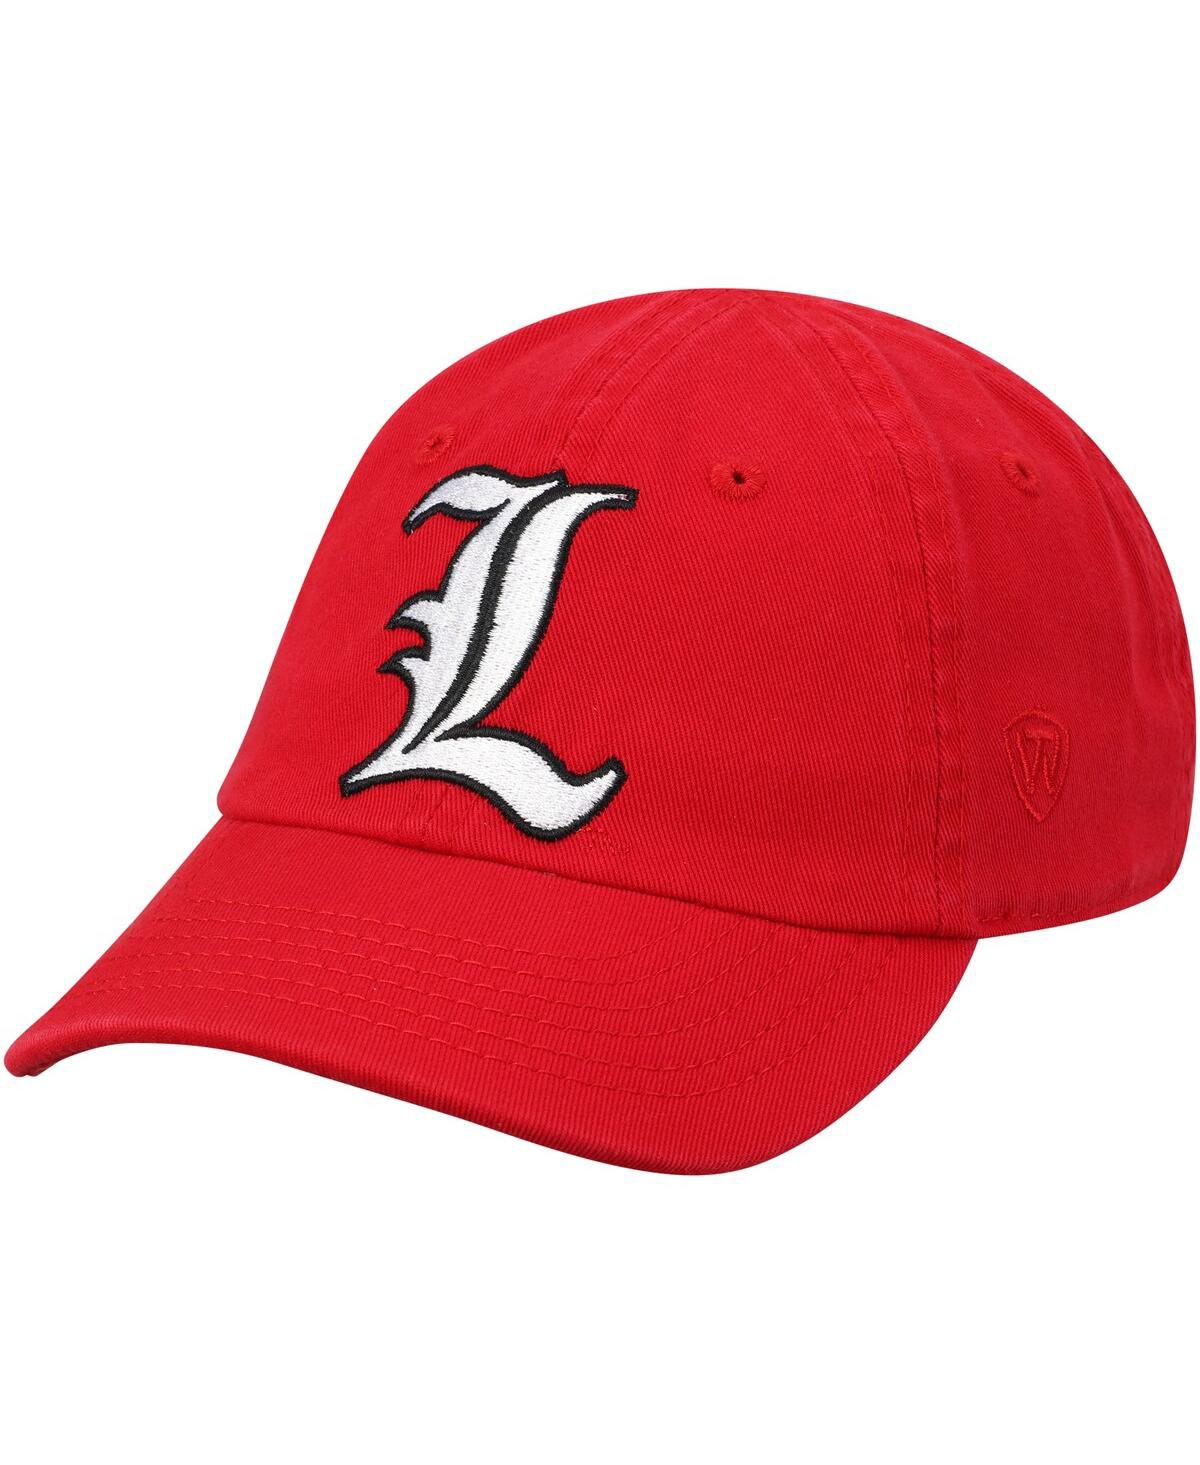 Top Of The World Babies' Infant Unisex  Red Louisville Cardinals Mini Me Adjustable Hat